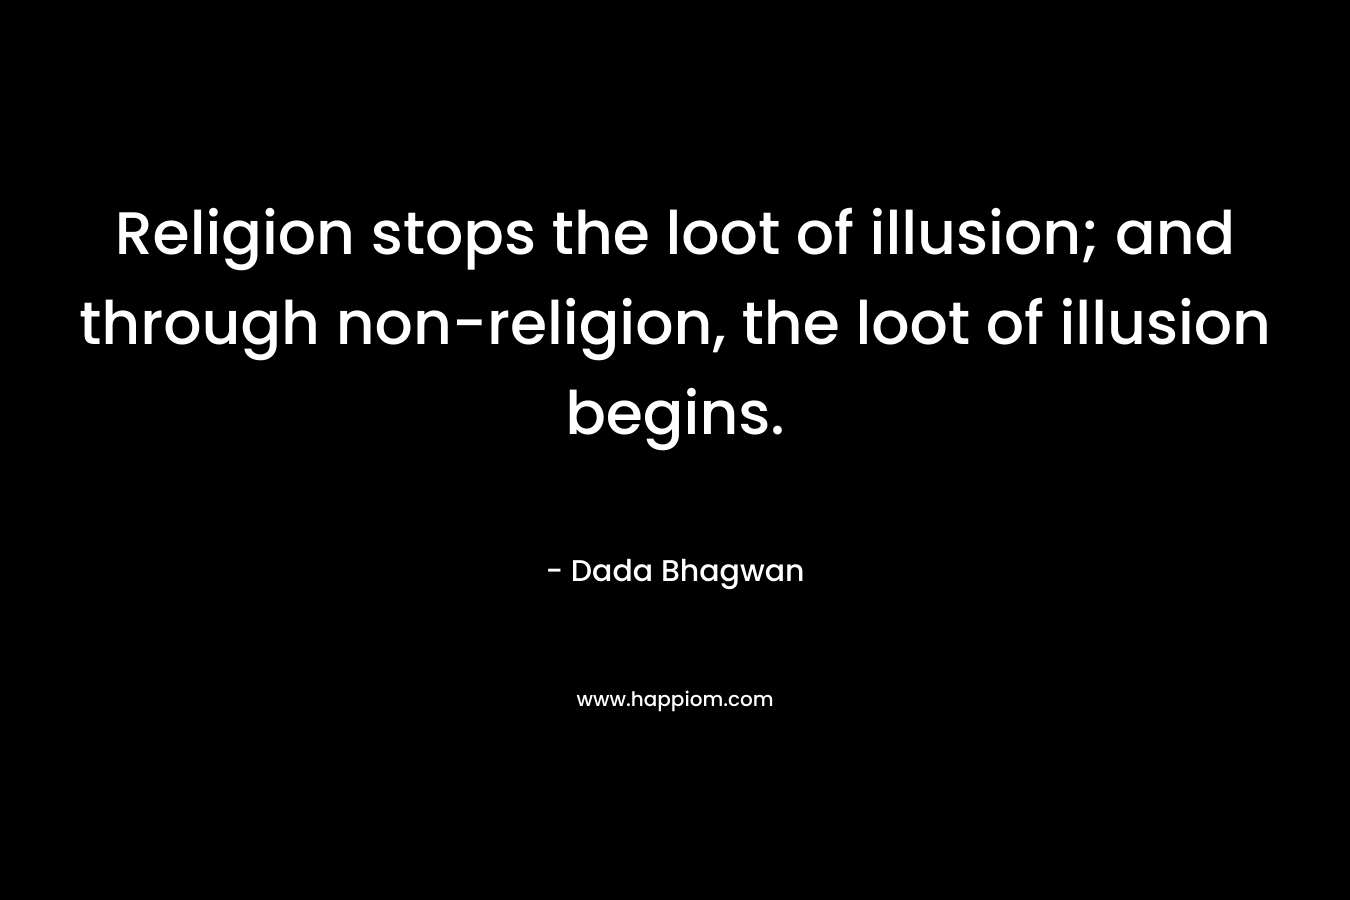 Religion stops the loot of illusion; and through non-religion, the loot of illusion begins.